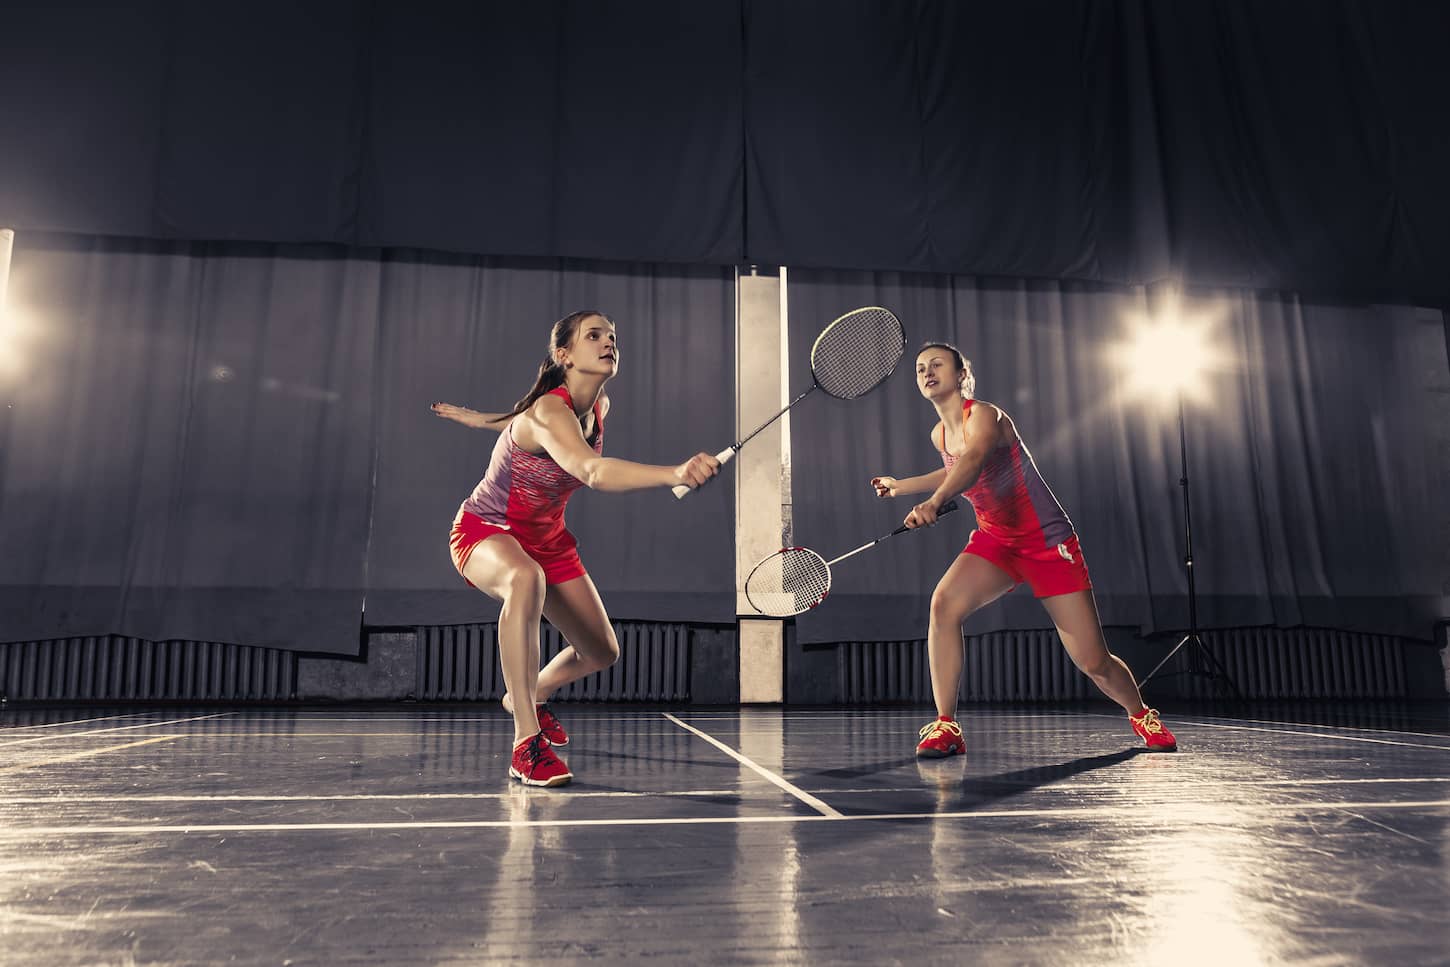 What Are the Benefits of Playing Badminton to Your Body?